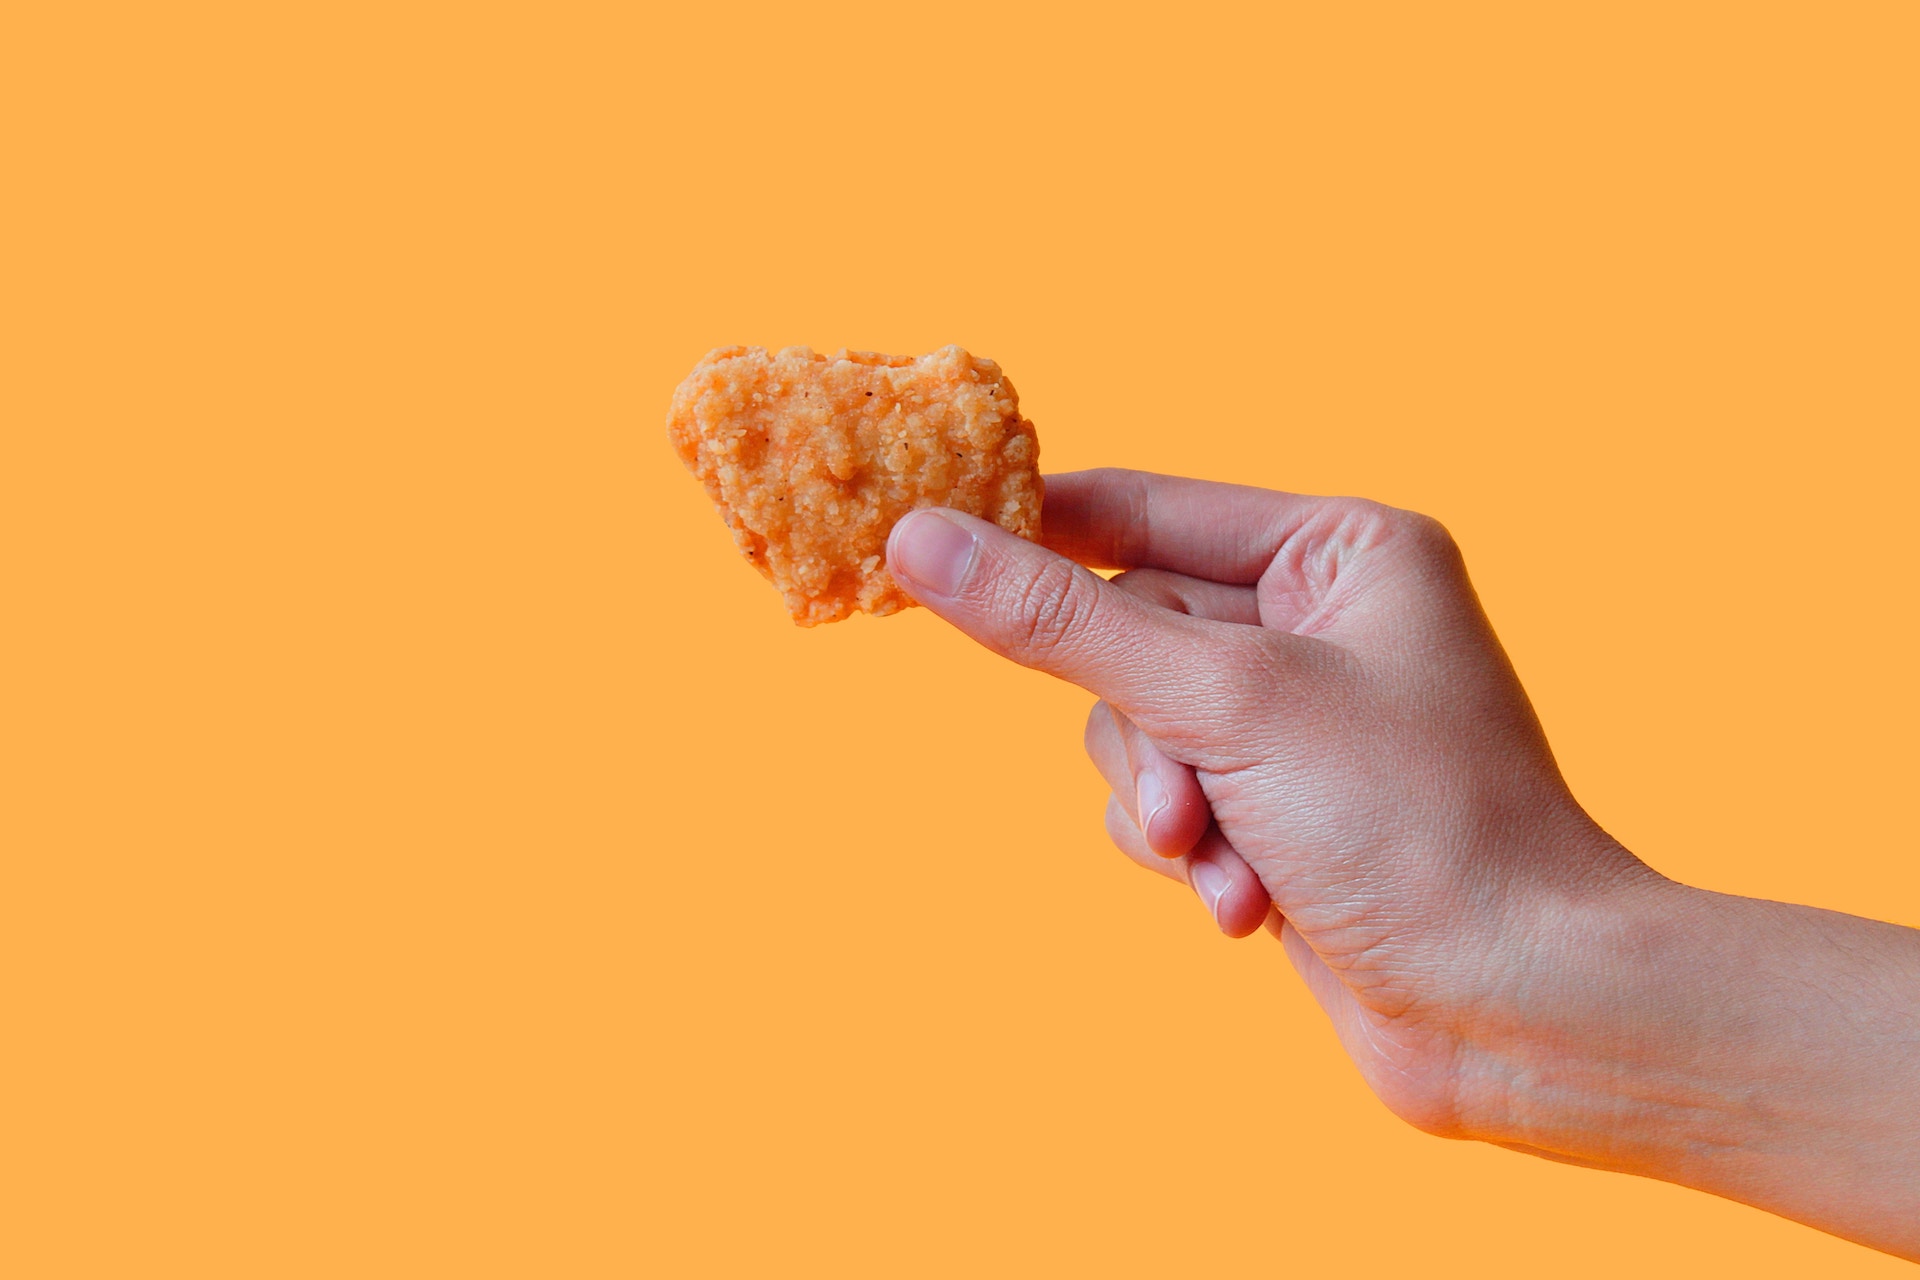 How chicken nuggets are made | Trading Justice Newsletter Vol. 21